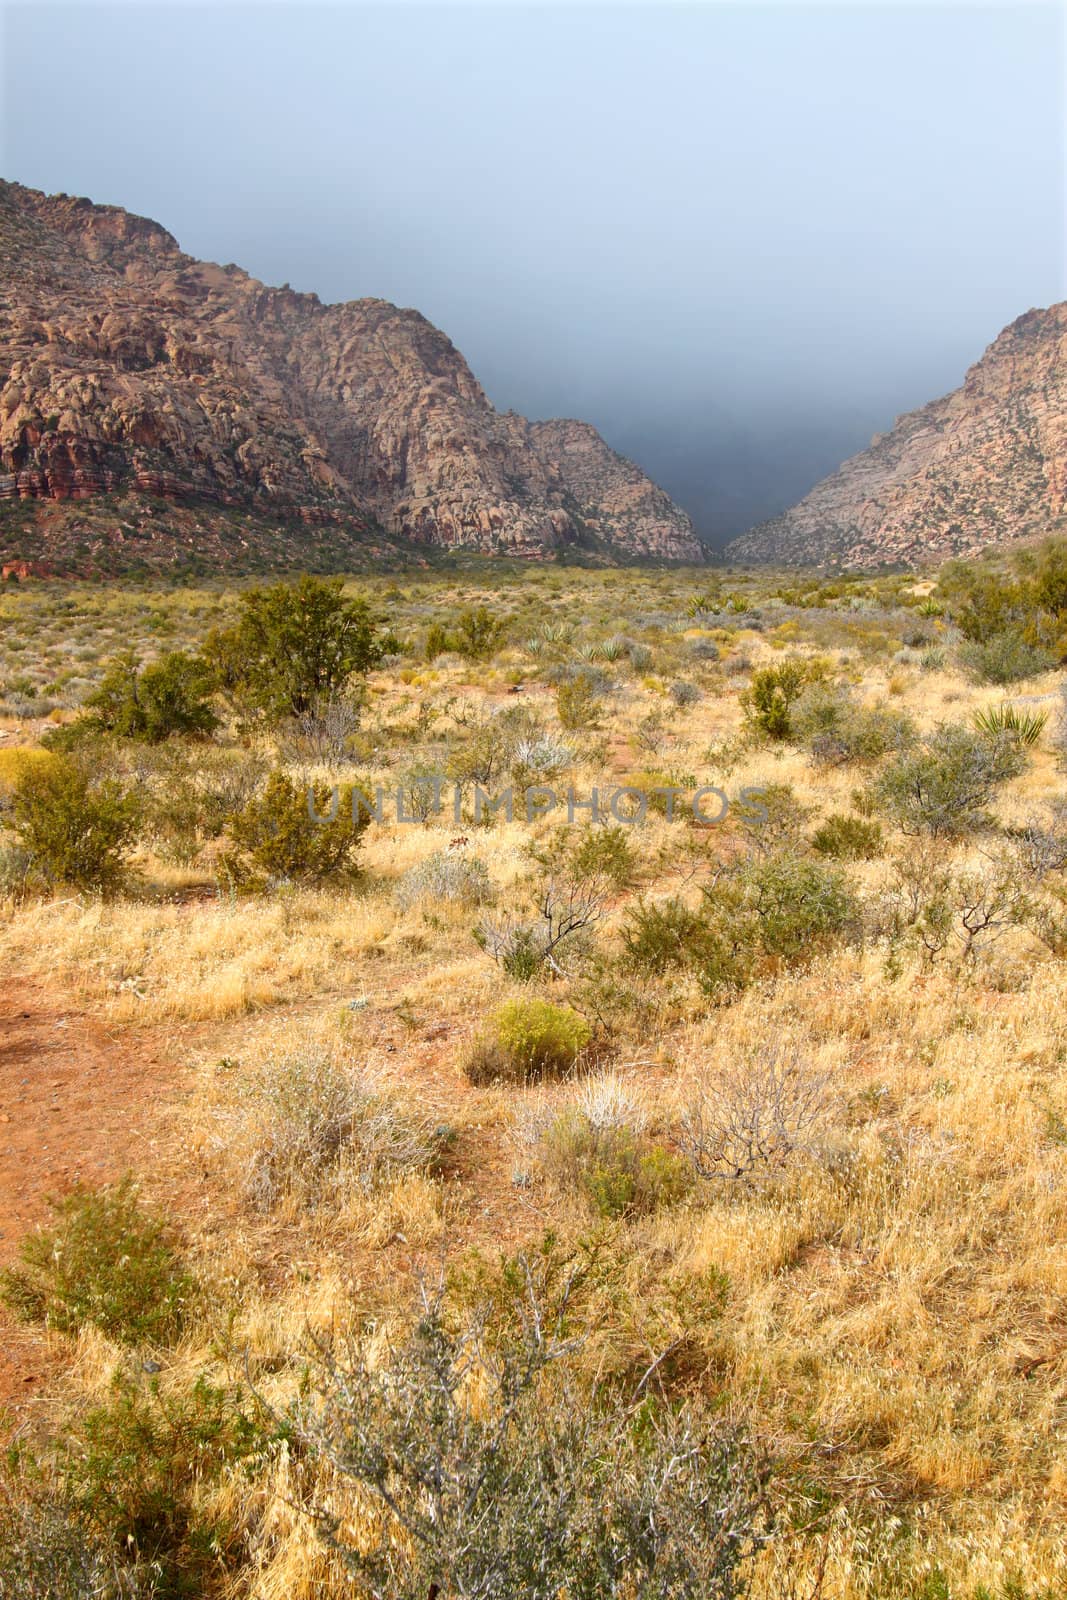 Dark clouds loom between mountain peaks at Red Rock Canyon National Conservation Area in Nevada.